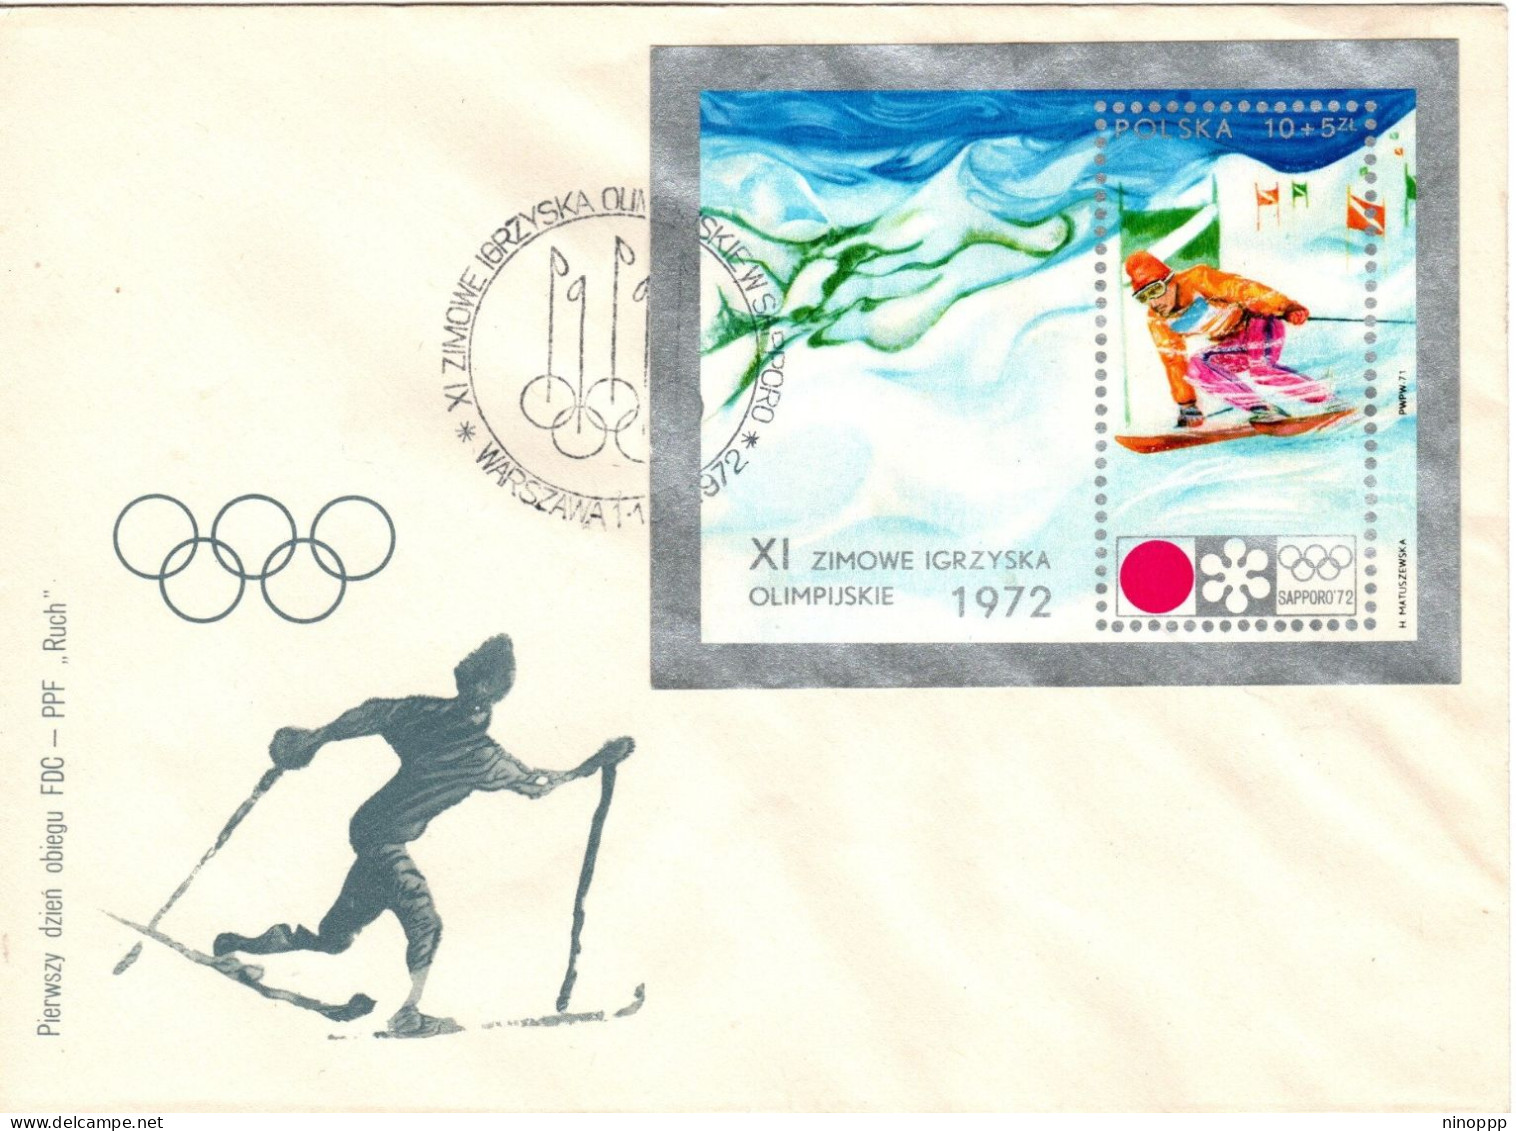 Poland 1972 Sapporo Winter Olympic Games,minisheet, First Day Cover - FDC